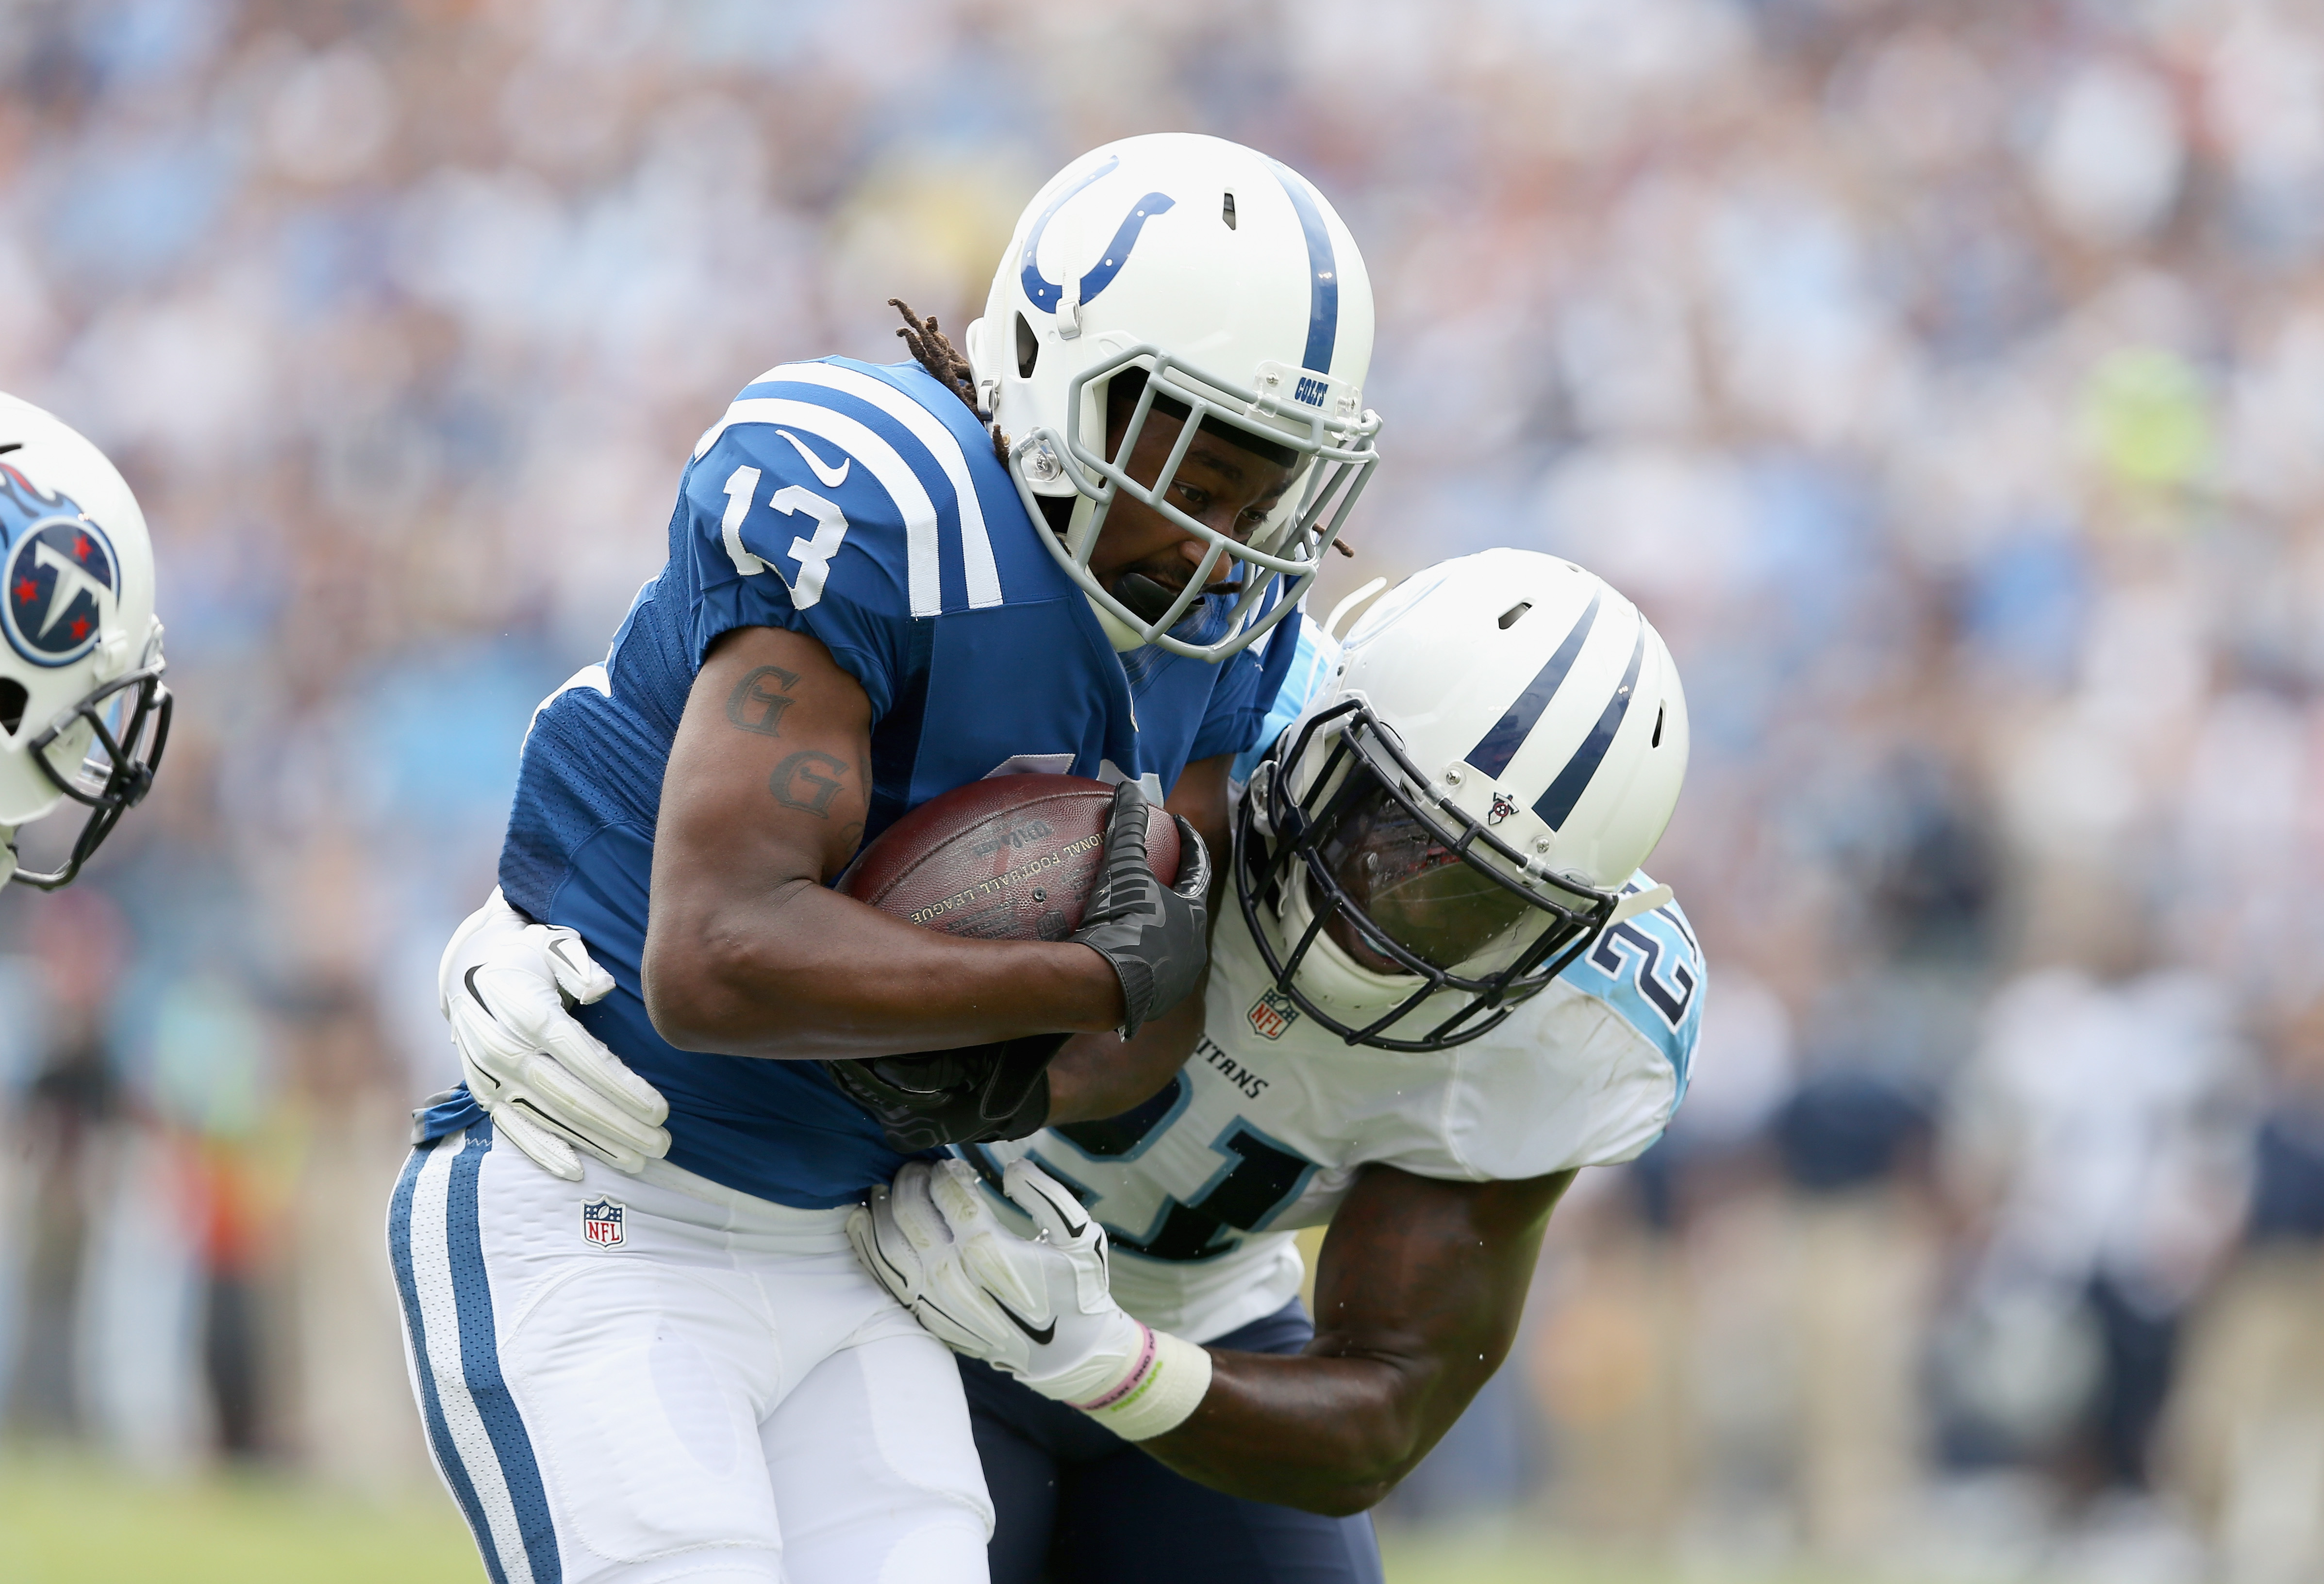 The Colts are counting on more production from T.Y. Hilton. (Getty)